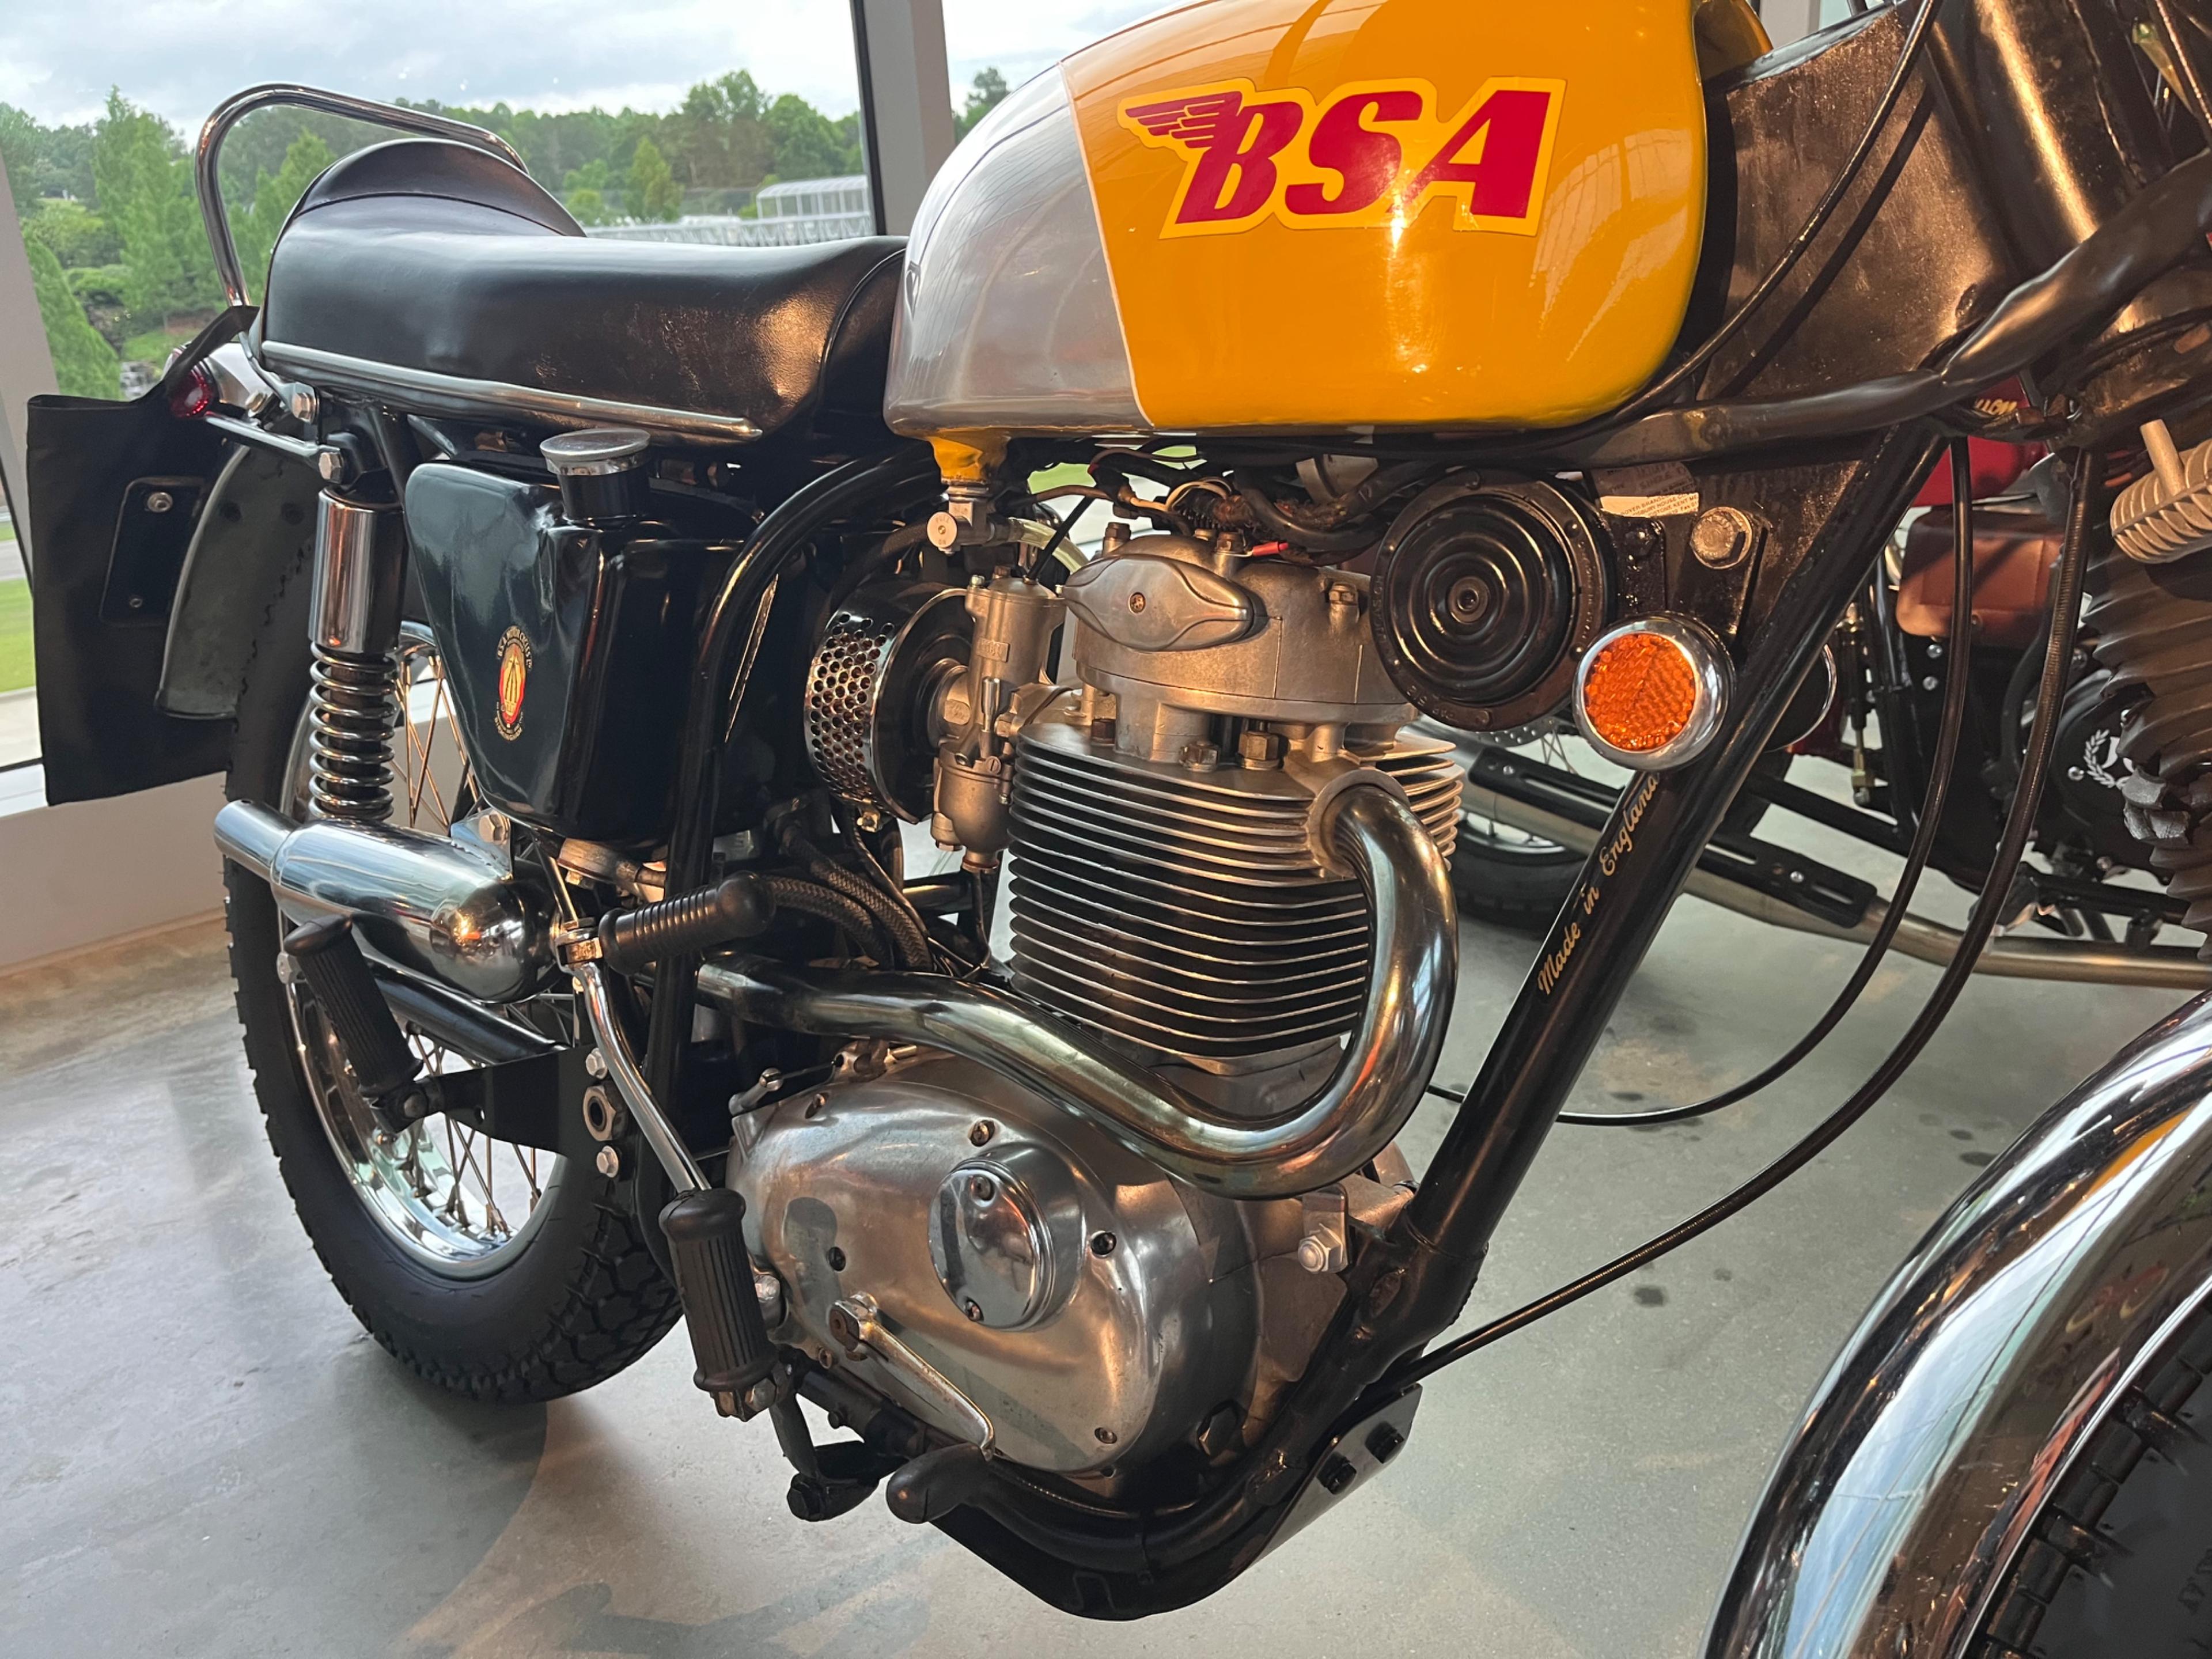 1968 BSA 440 | Offered at No Reserve